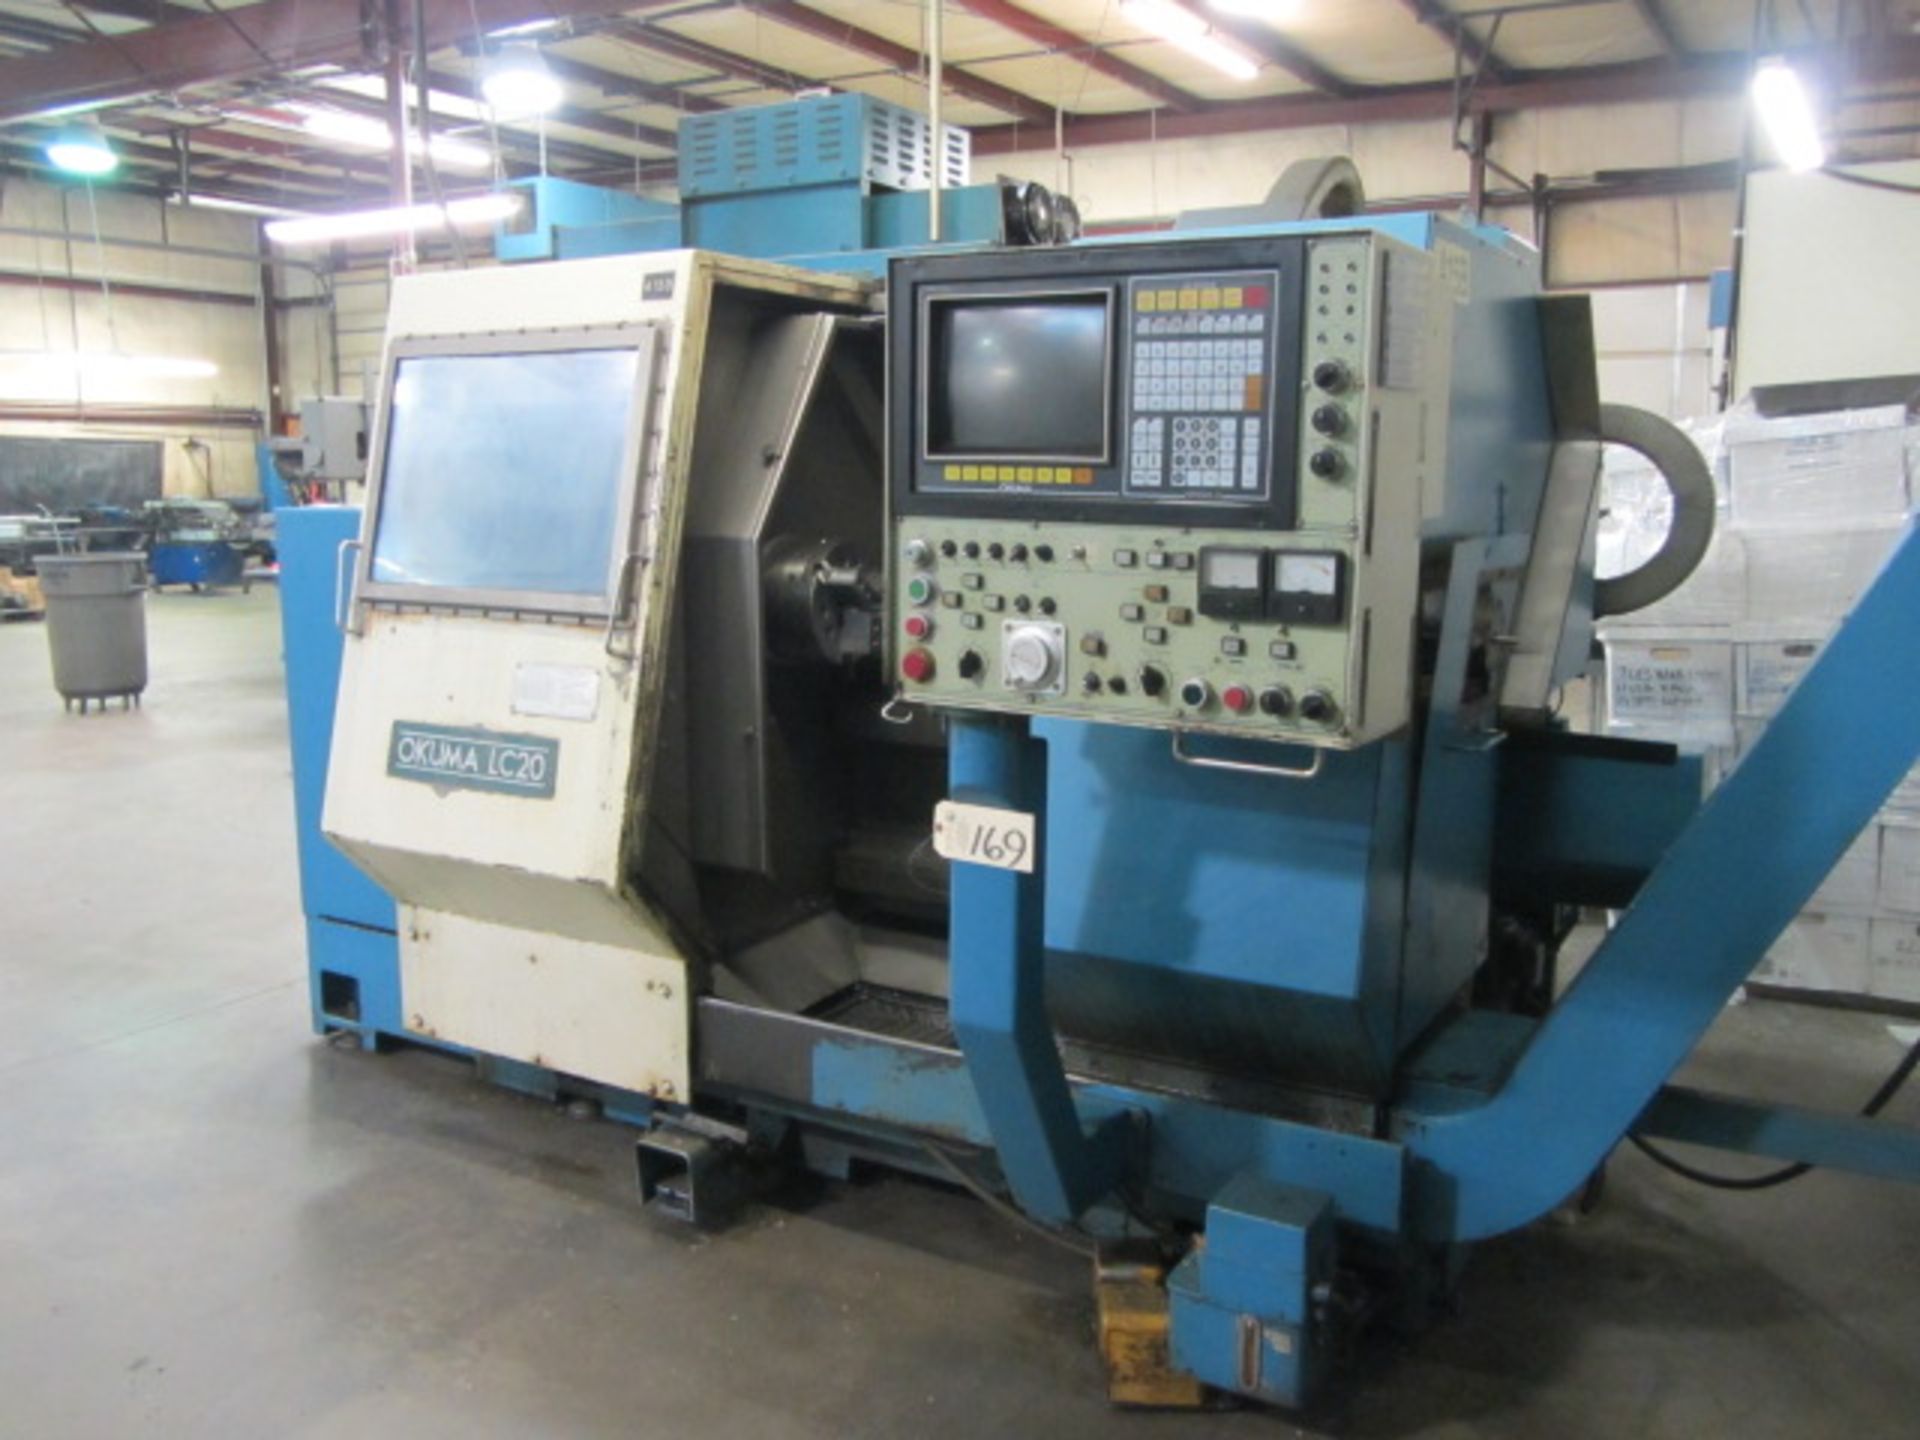 Okuma LC20 CNC Turning Center with 10'' 3-Jaw Power Chuck, 24'' Max Distance to Tailstock, Spindle - Image 4 of 8